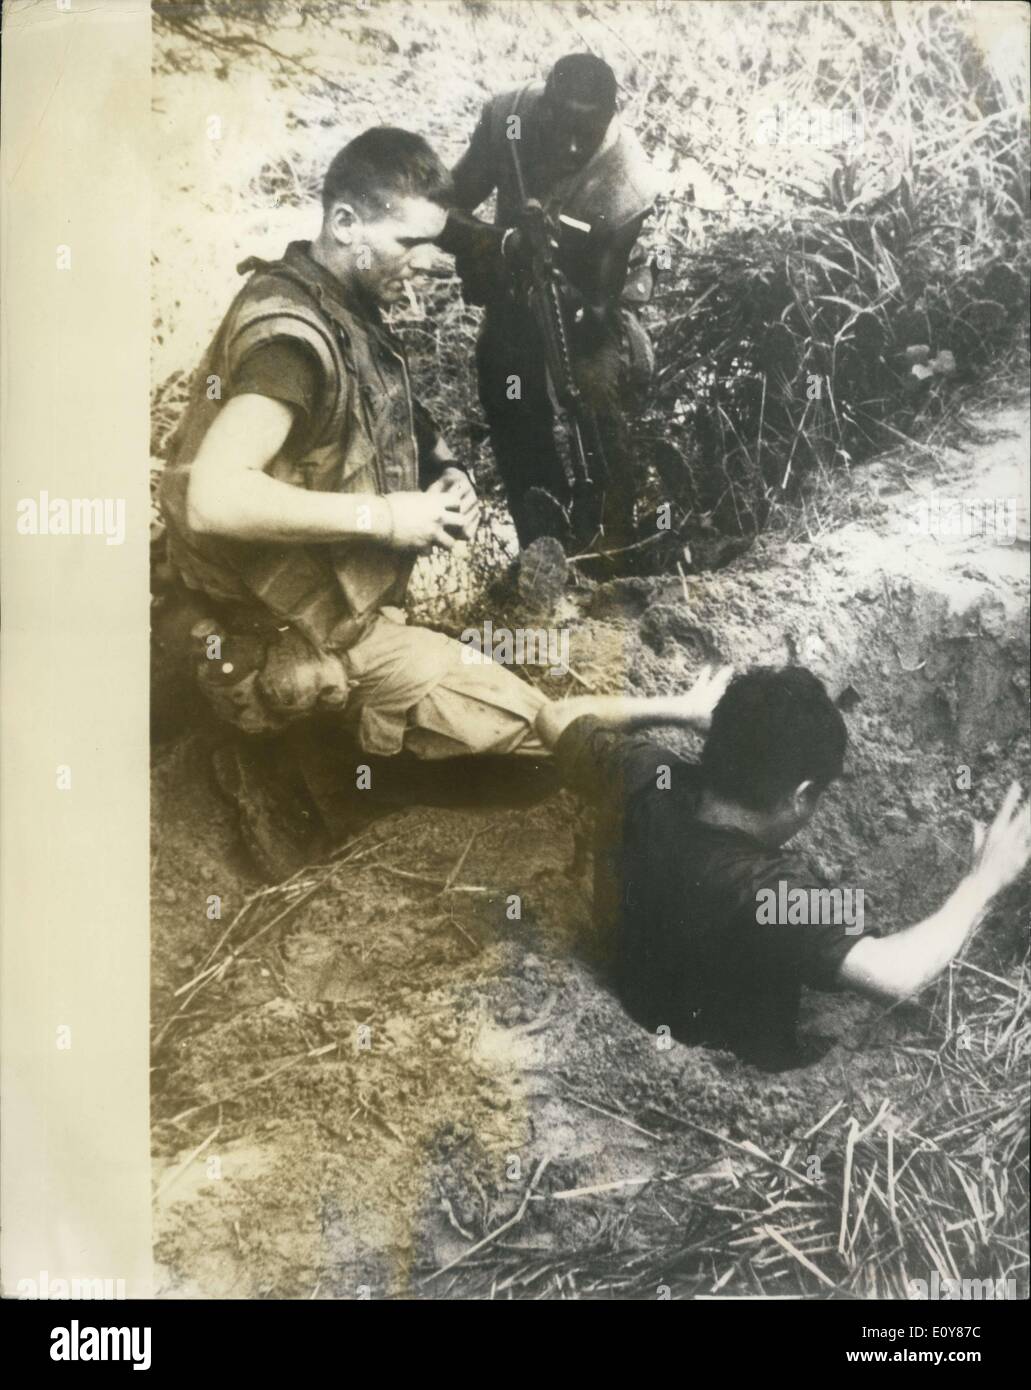 Jan. 14, 1969 - Flushing A ''Fox''. A Viet Cong sniper is flushed from his hole by two U.S. Marines 22 miles south of Da Nang. The Marine calmly smoking a cigarette has his hands around a grenade ready to pull the pin if the prisoner has any pals in the underground bunker who will not come out, while another Marine covers the man with his automatic rifle. Stock Photo